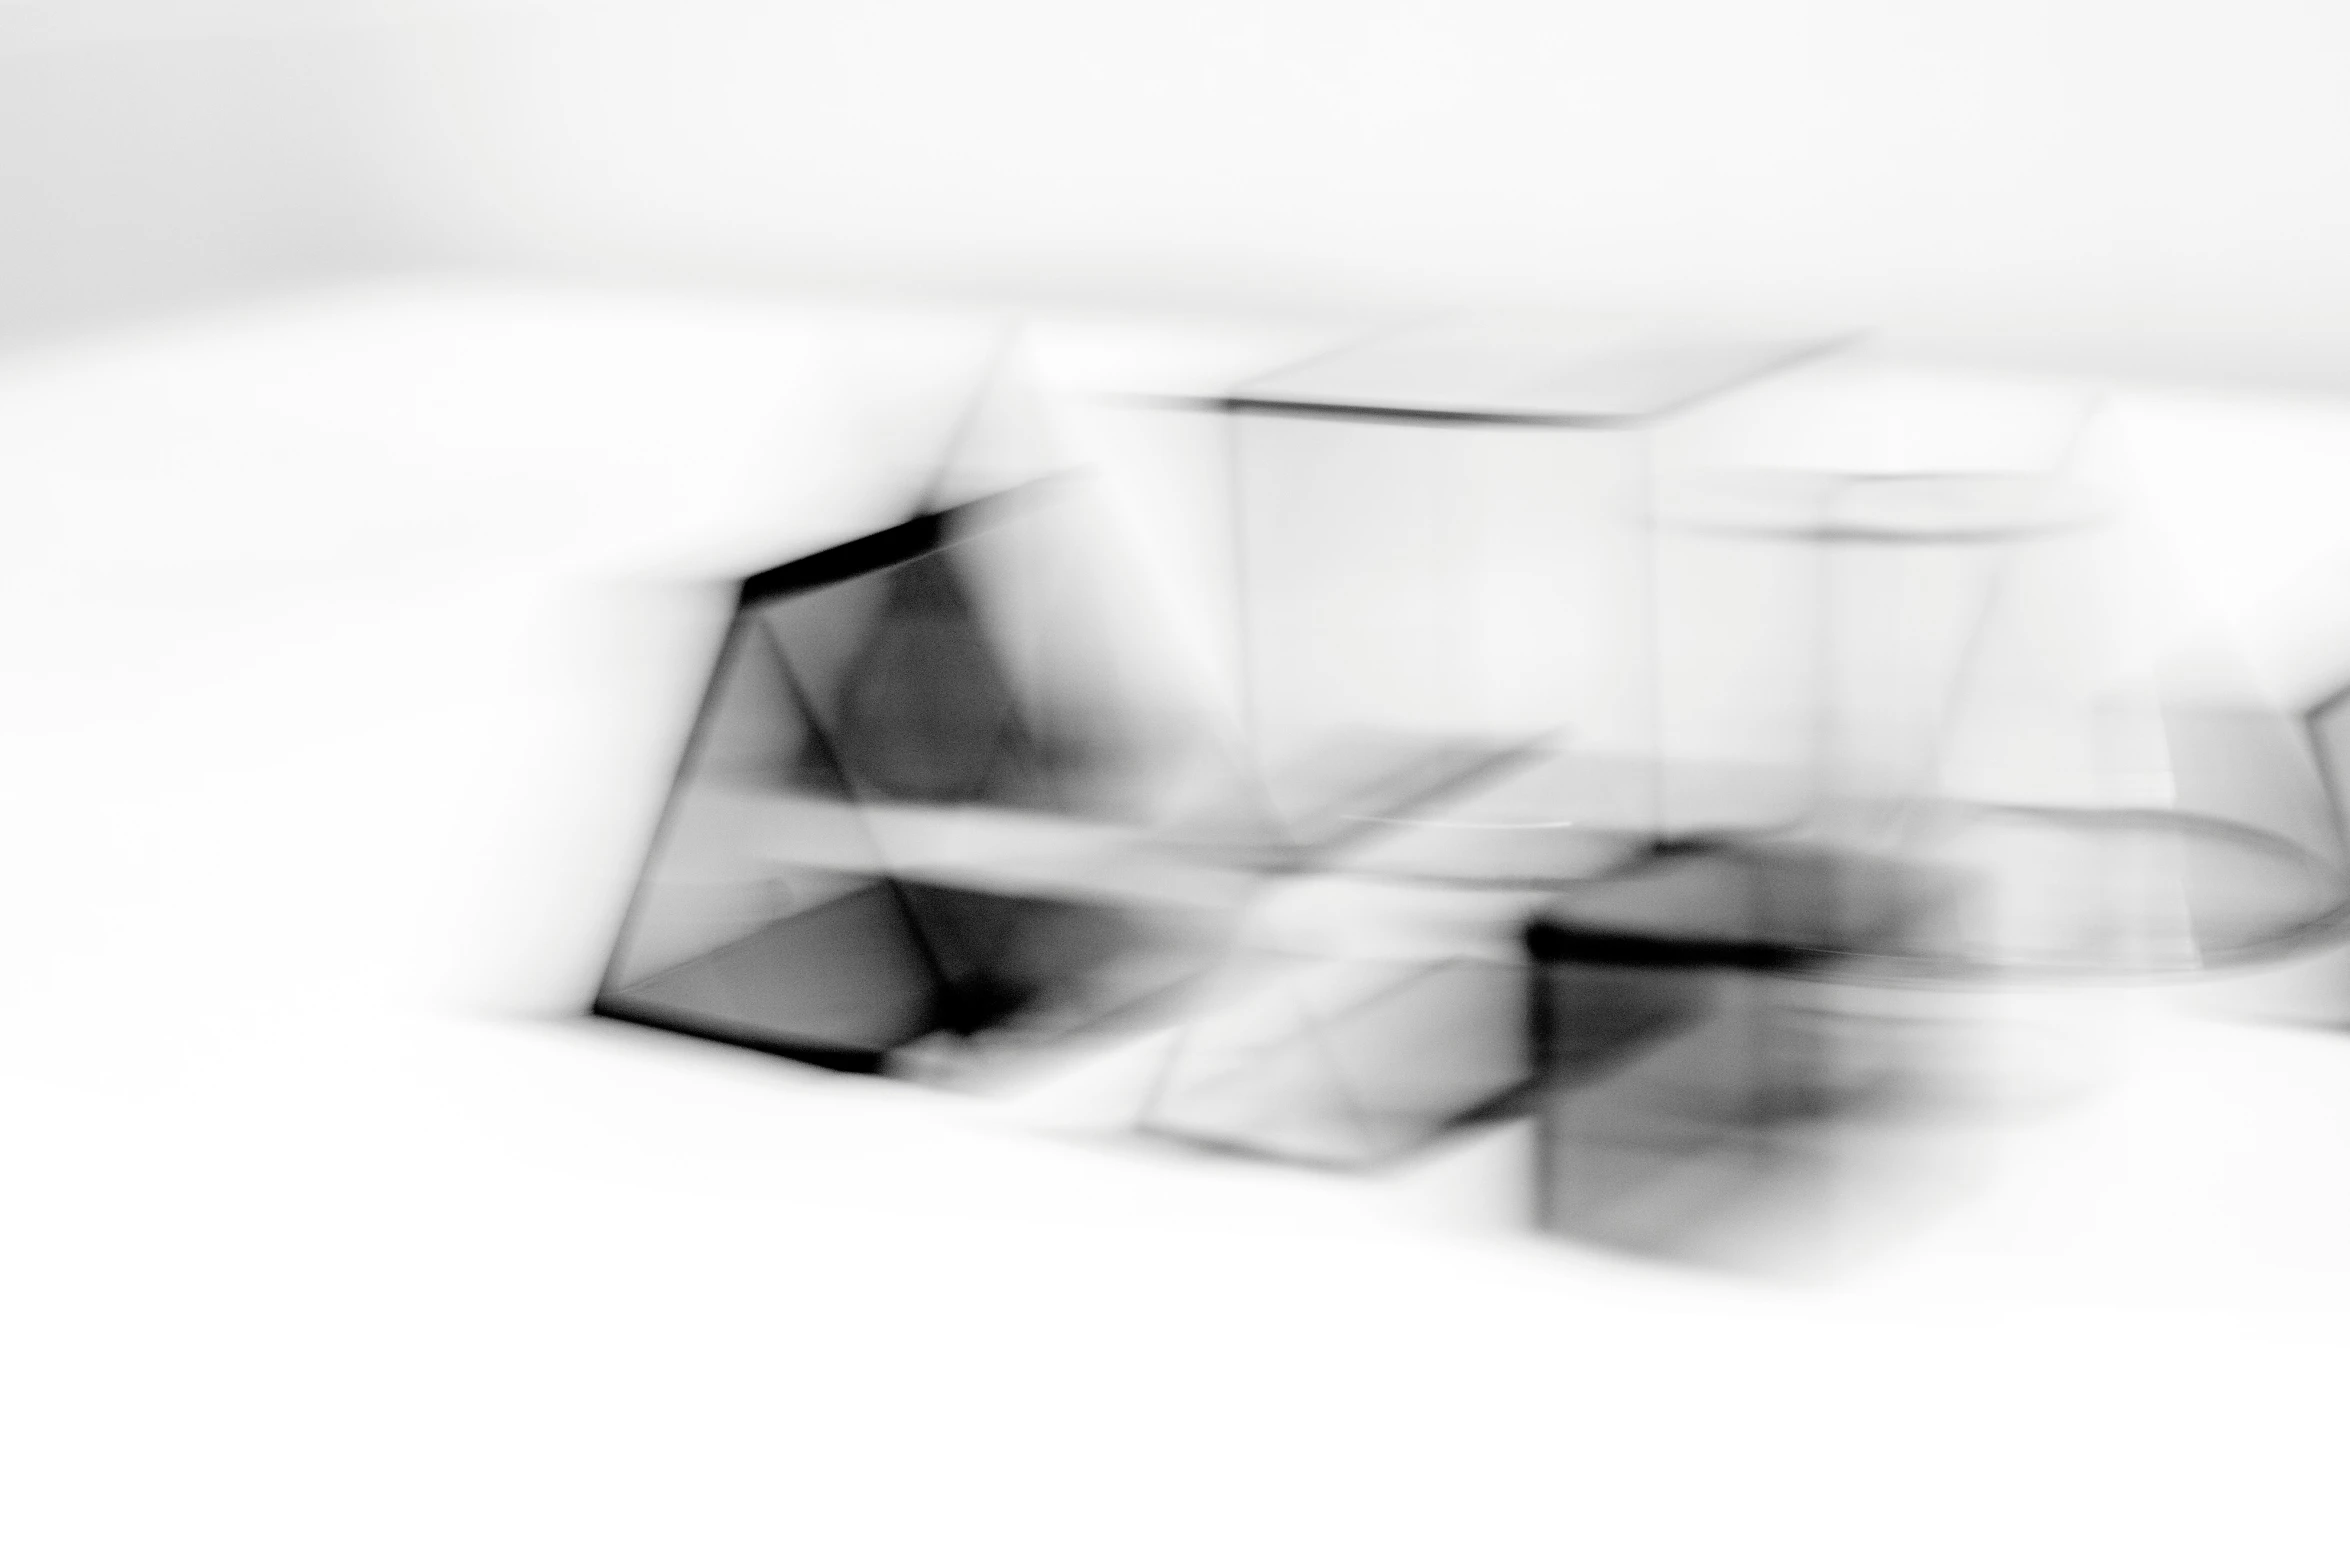 blurry pograph of an artistic cube